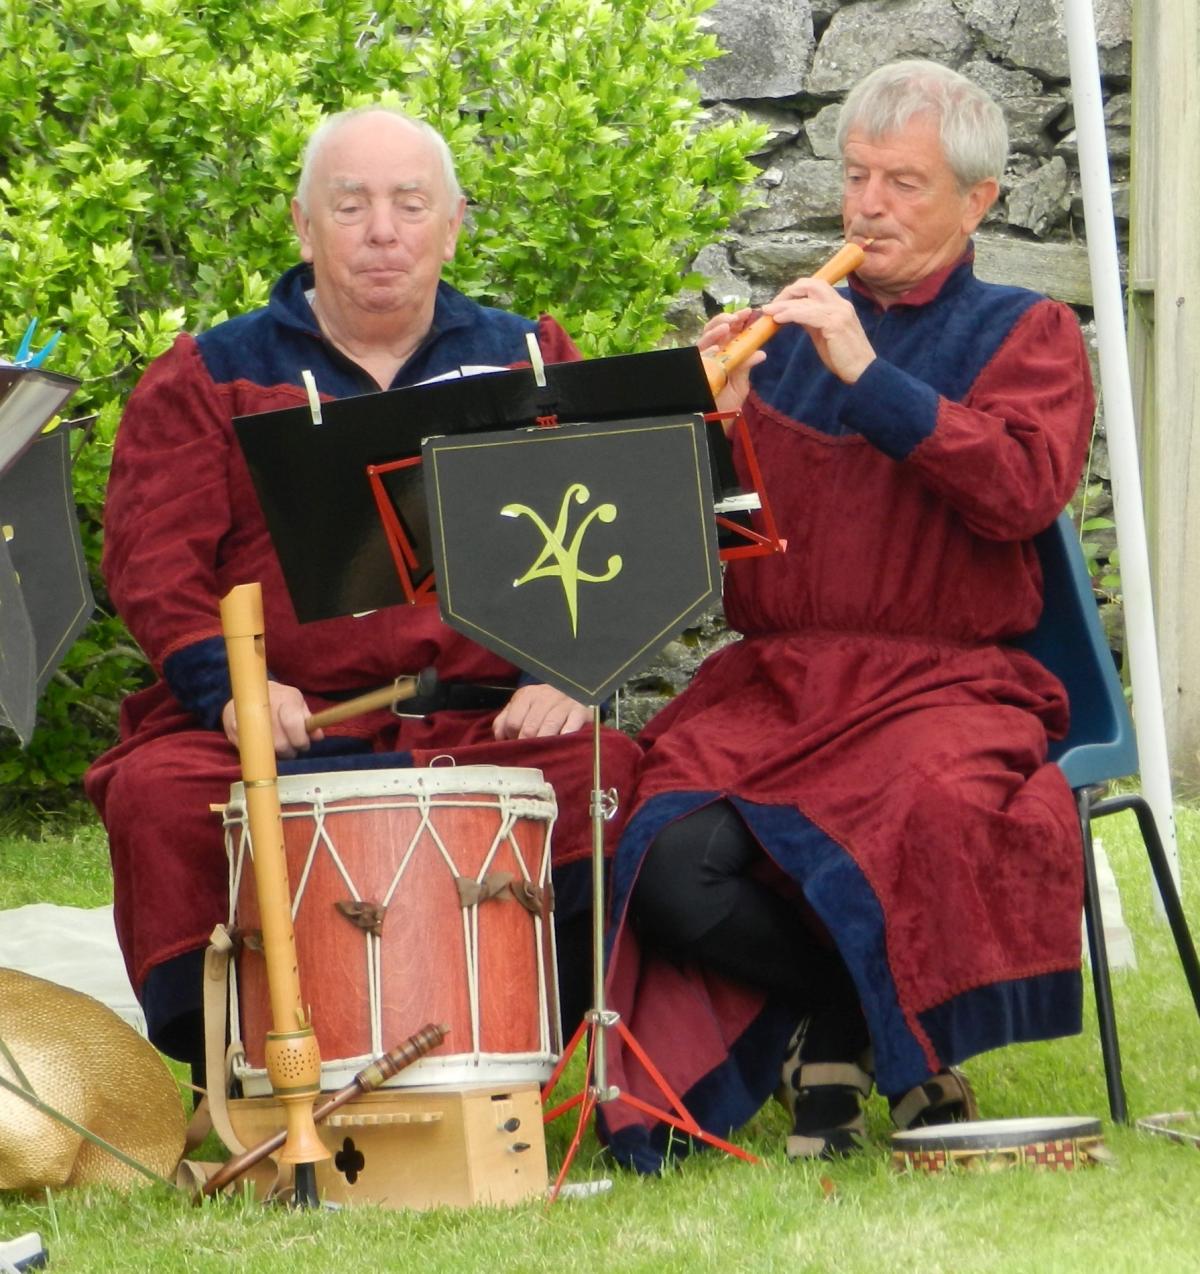 Lllandstadwell returns to Medieval times for village fayre